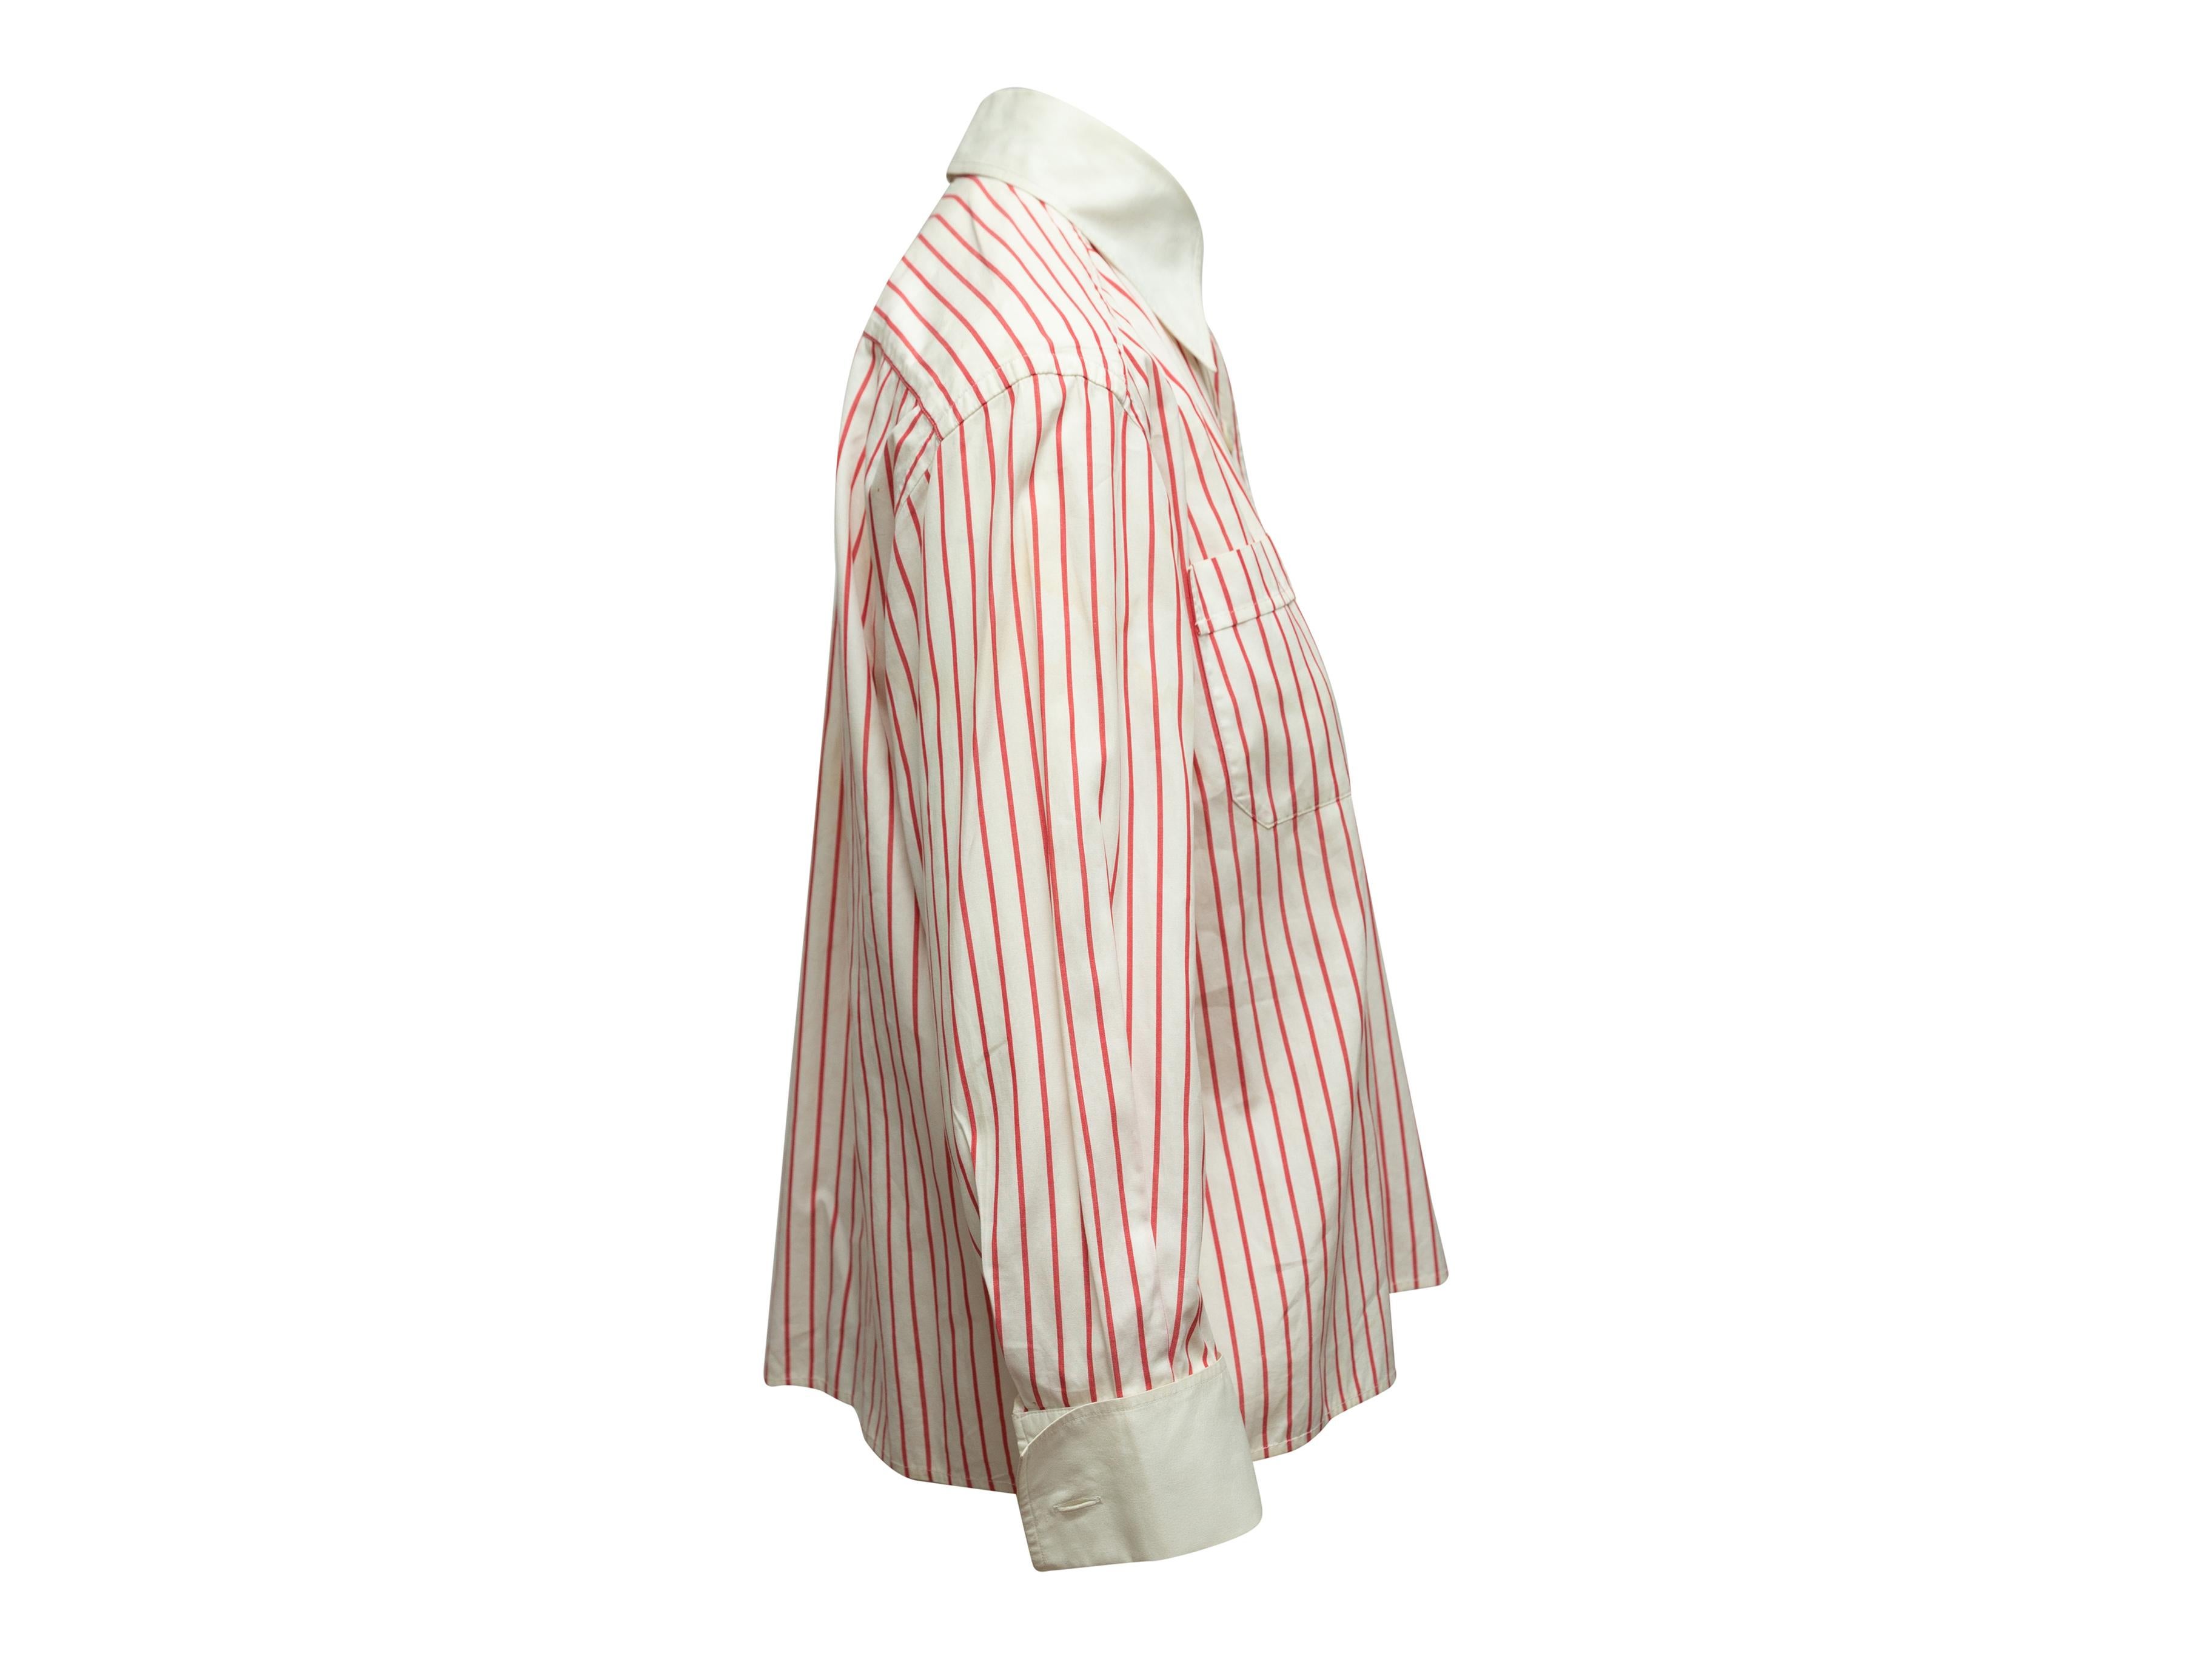 Product details: Vintage white and red striped button-up top by Chanel Boutique. Pointed collar. Long sleeves. Button closures at center front. 38